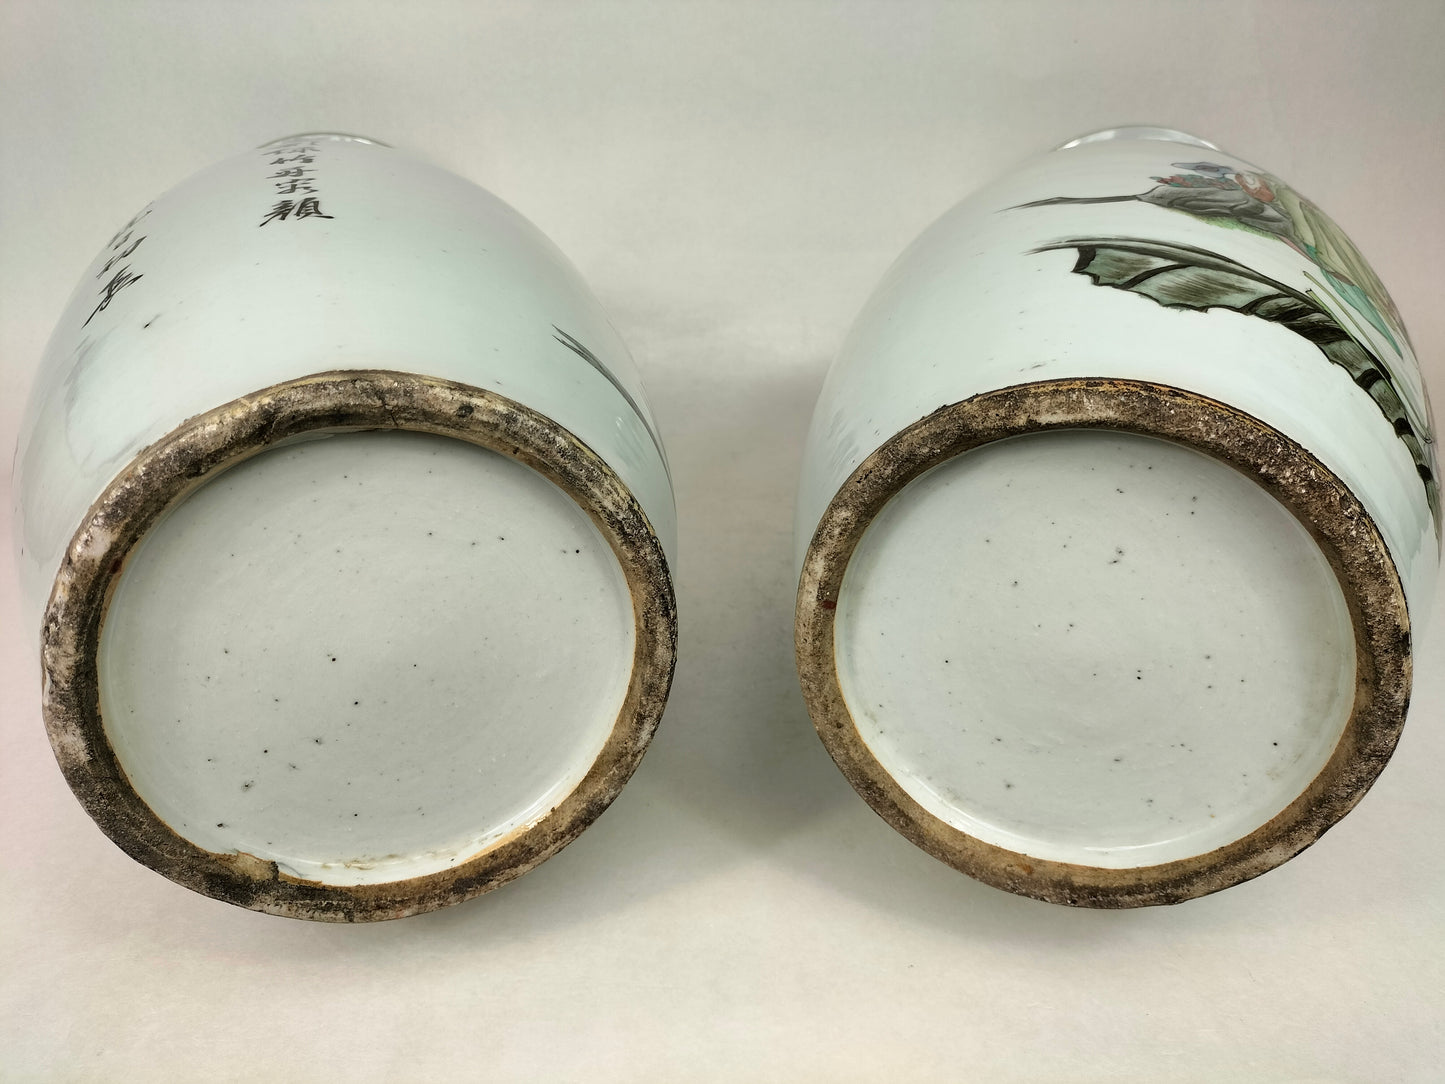 Pair of large antique Chinese polychrome vases decorated with a garden scene // Republic Period (1912-1949)